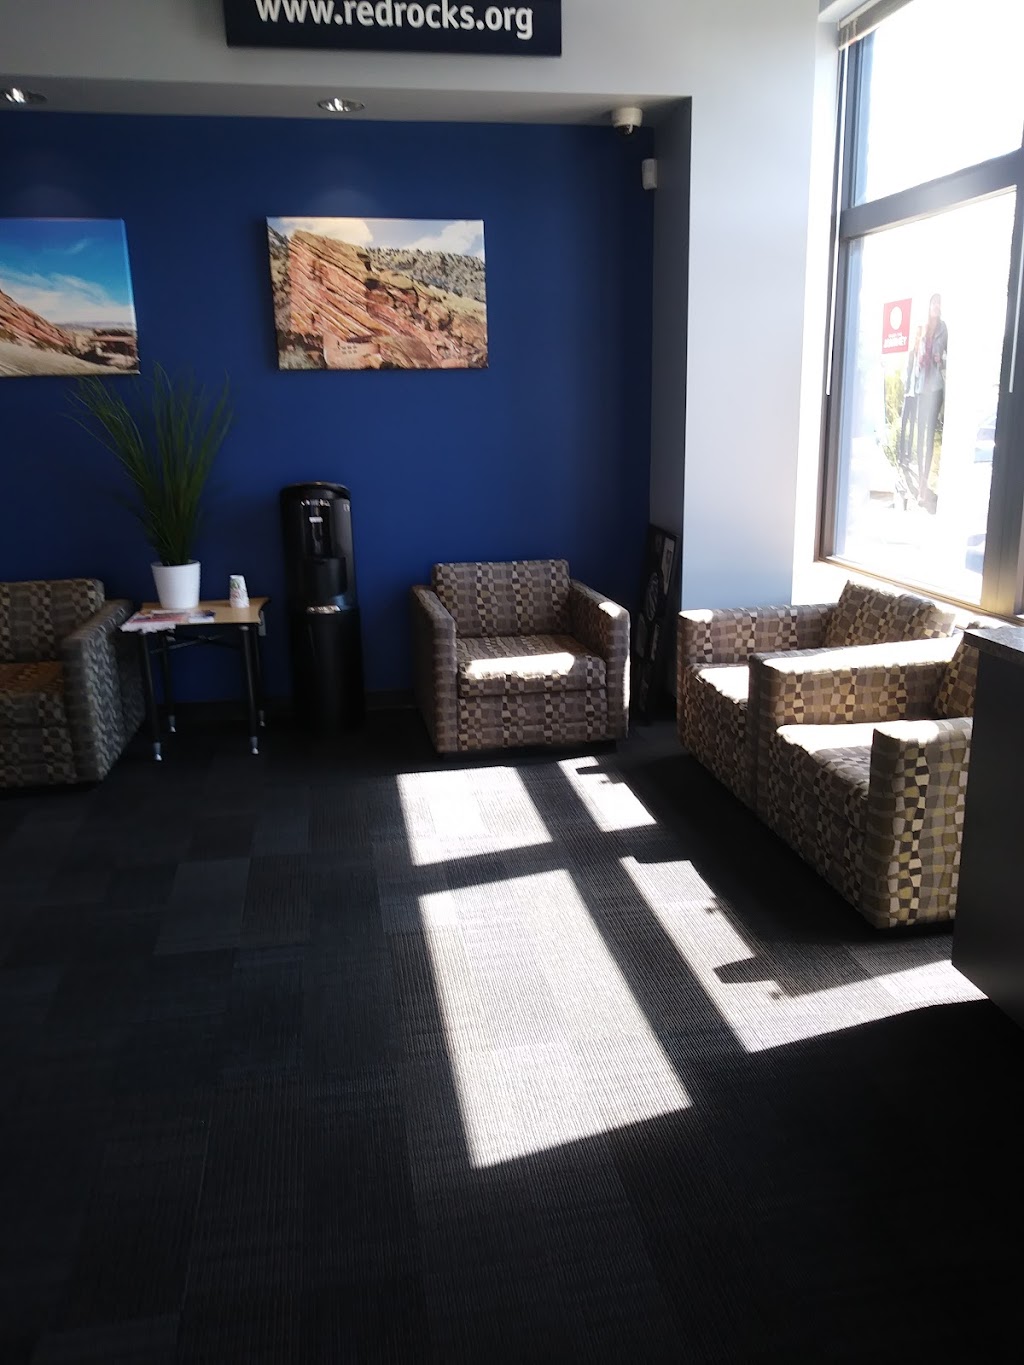 Red Rocks Credit Union | Photo 3 of 6 | Address: 9332 Dorchester St, Highlands Ranch, CO 80129, USA | Phone: (303) 471-7625